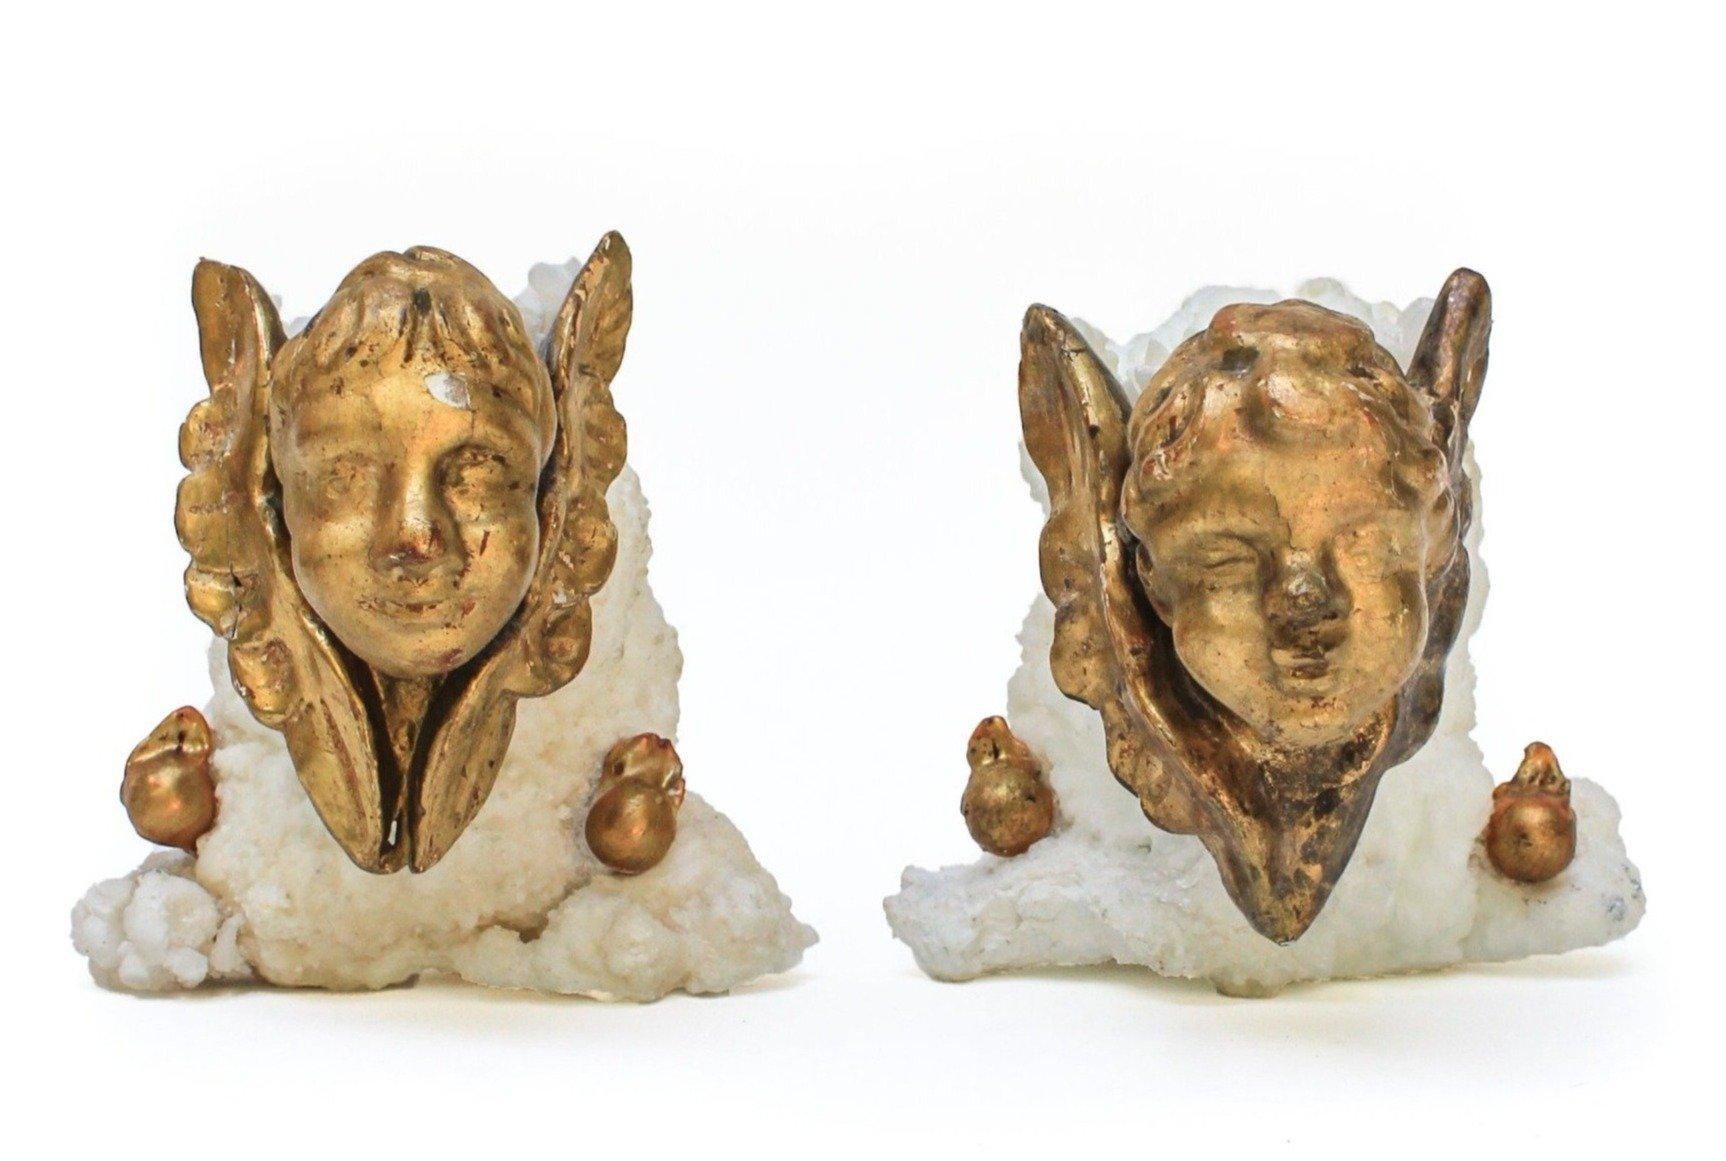 18th century Italian gold leaf angels mounted on aragonite and adorned with baroque pearls. These angels or putti (plural for putto) are cherub figures that frequently appear in both mythological and religious paintings and sculpture, especially of